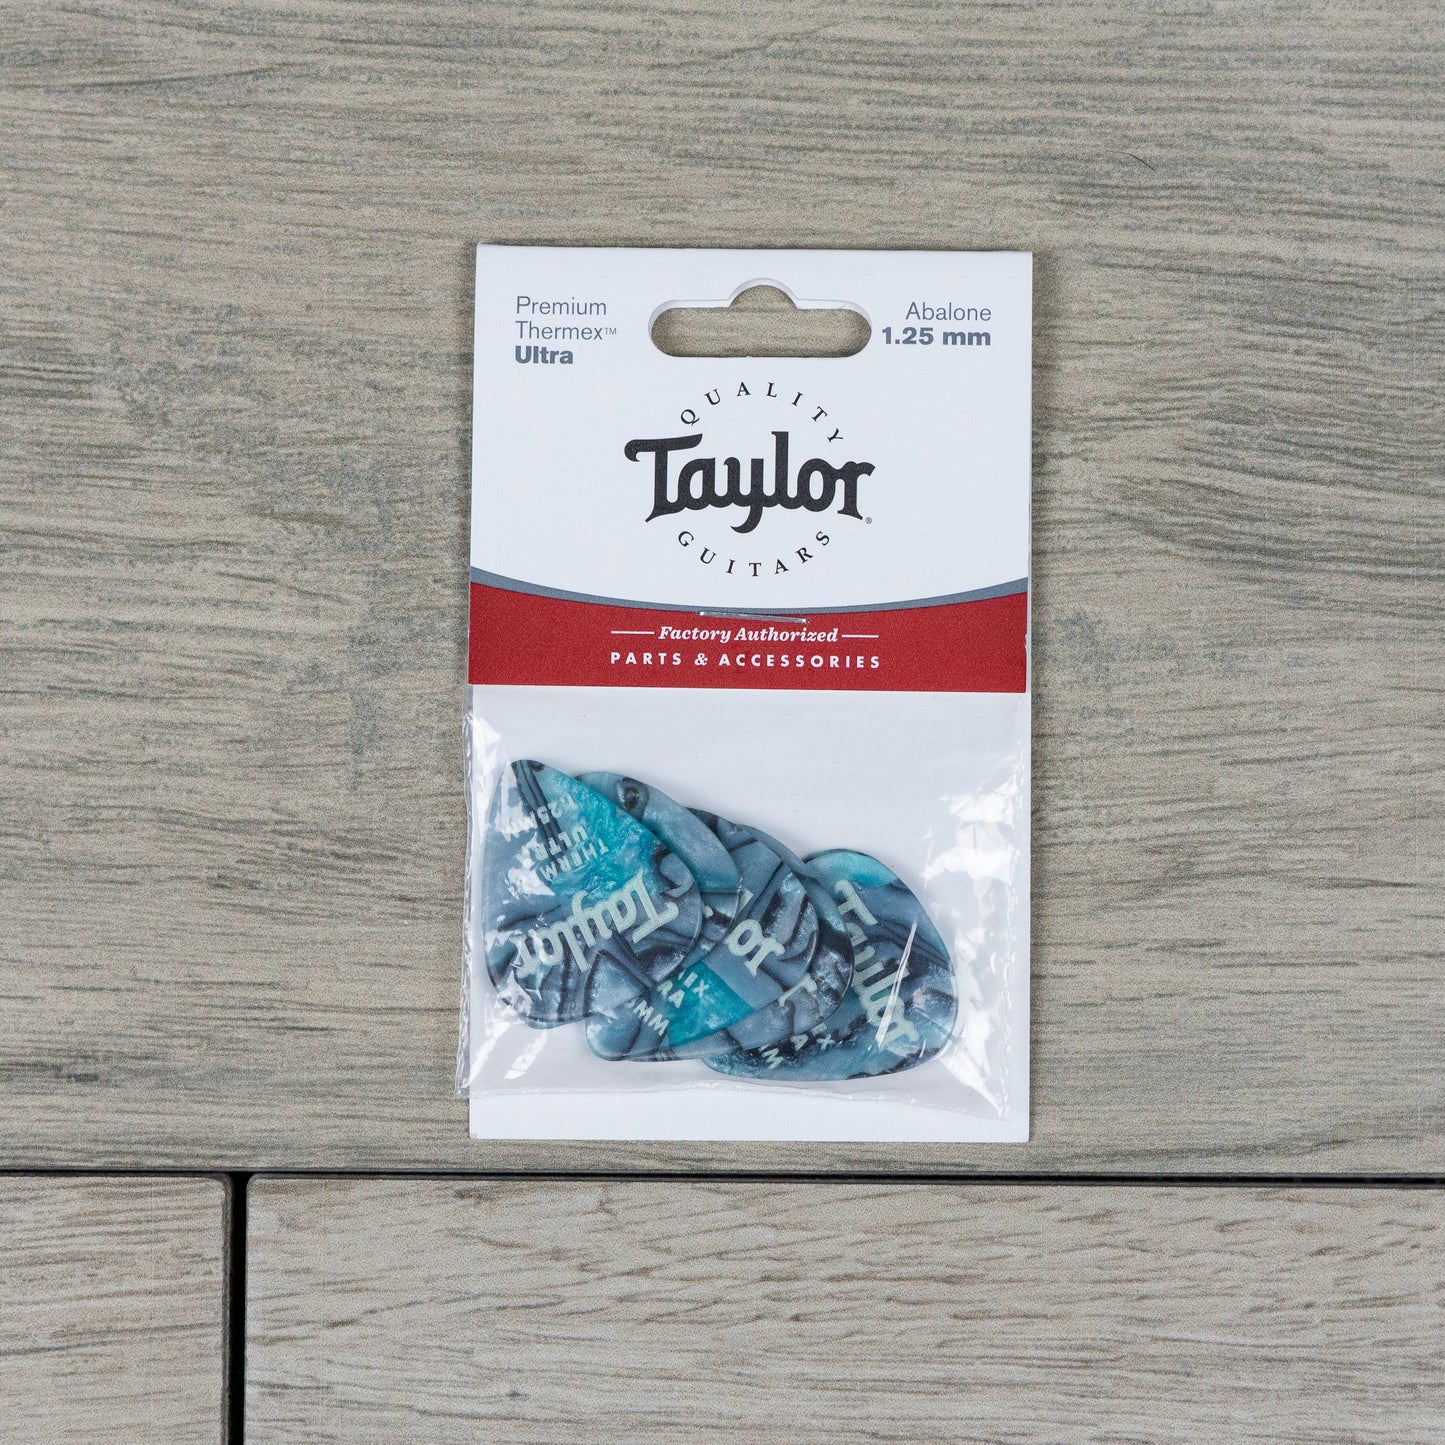 Taylor Premium 351 Thermex Ultra Picks, Abalone, 6-Pack, 1.25 mm